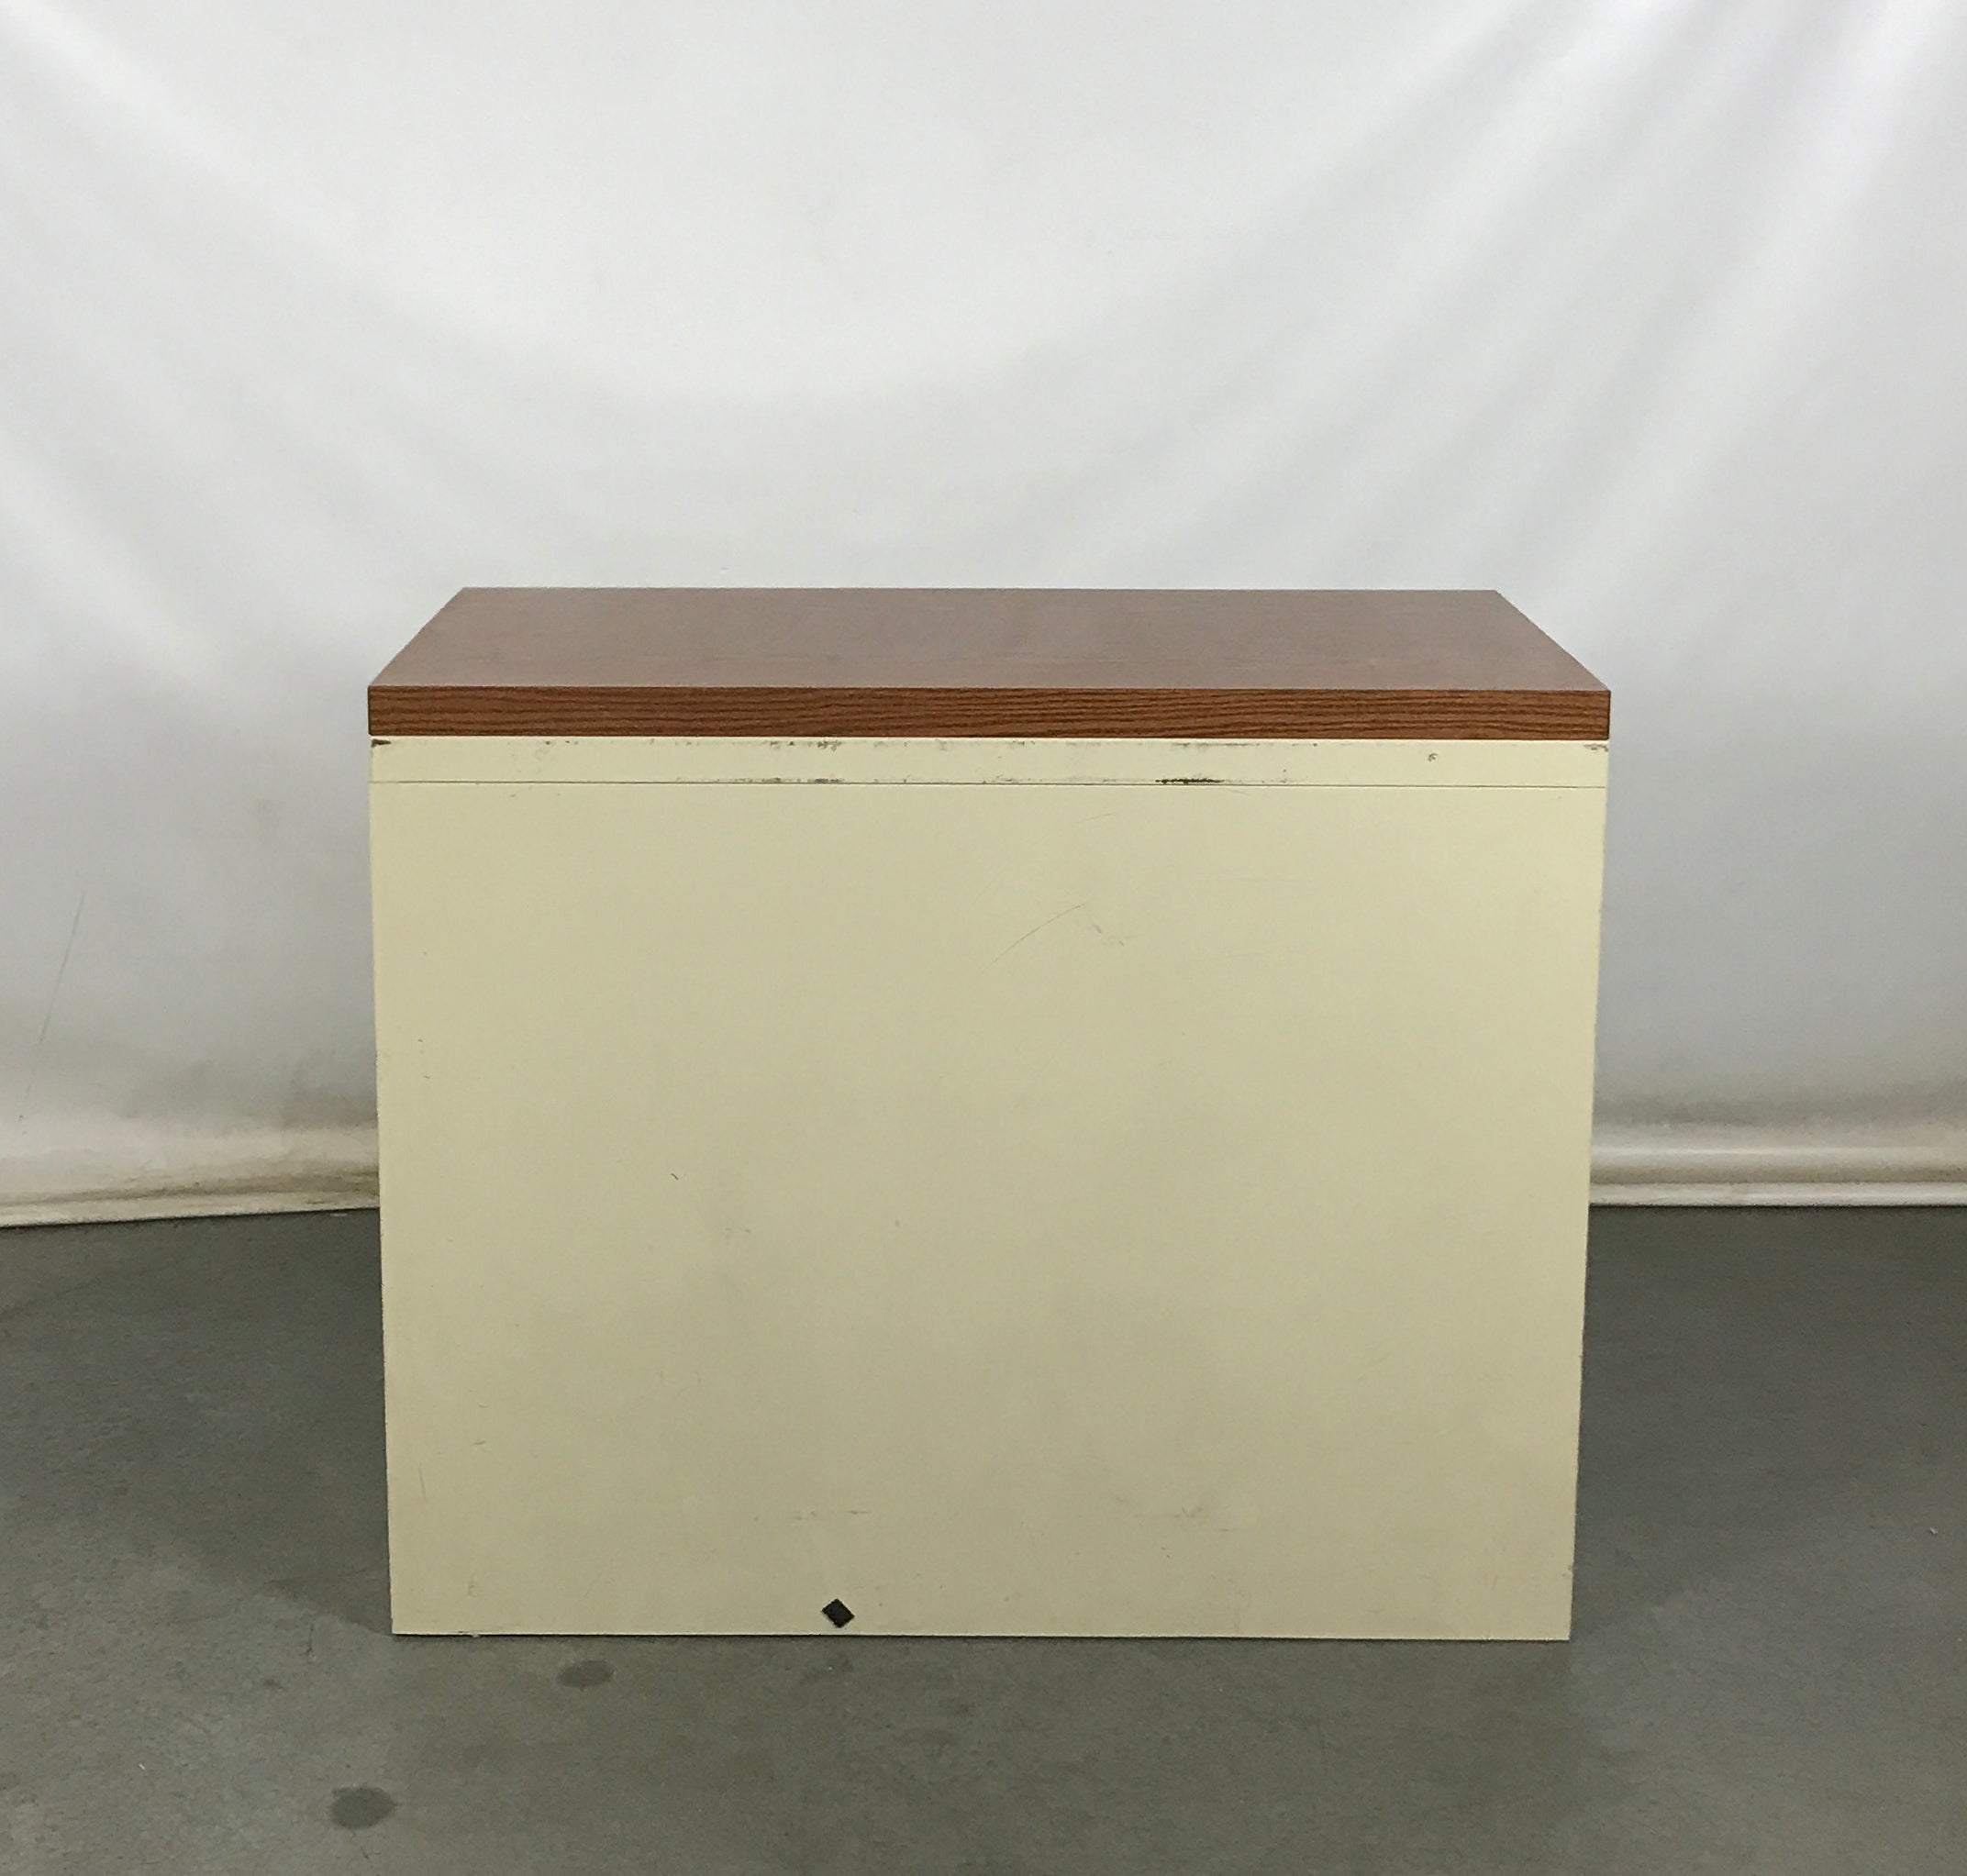 Cream Wooden Top Lateral File Cabinet